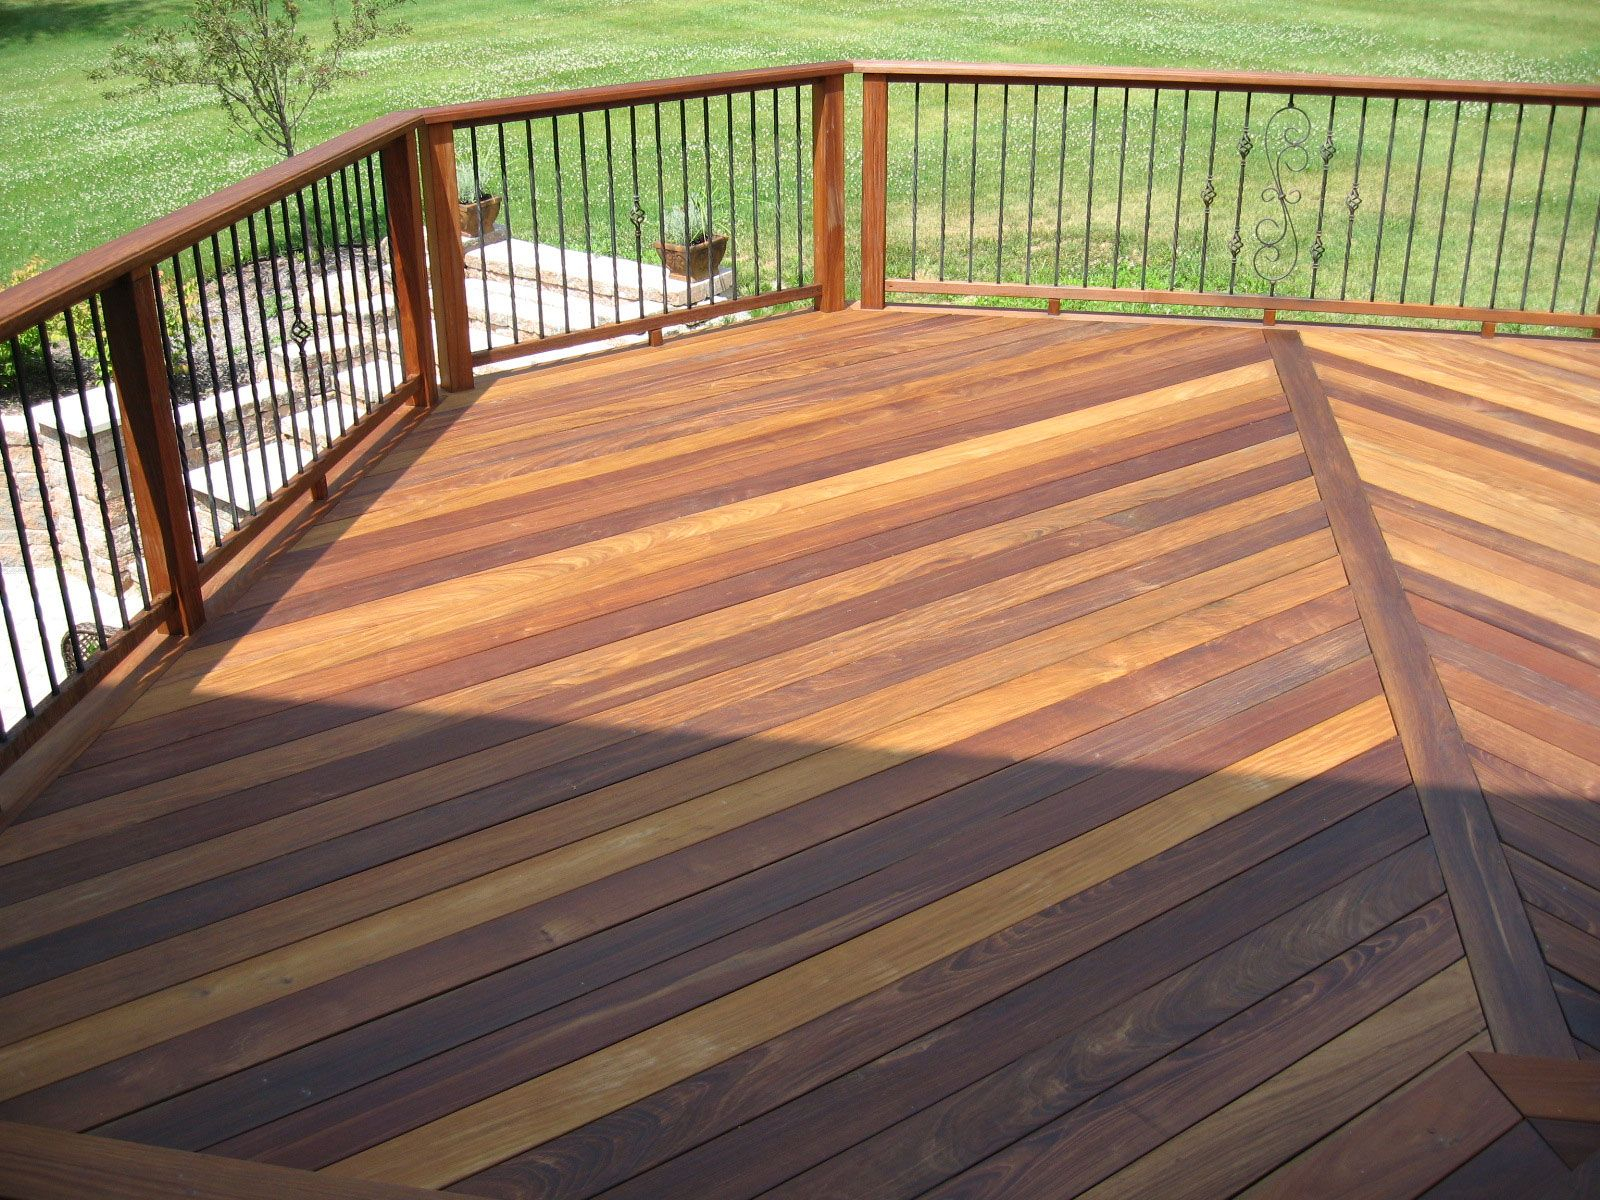 Gallery Timber Flooring Decking Screening Bamboo Pine with regard to dimensions 1600 X 1200